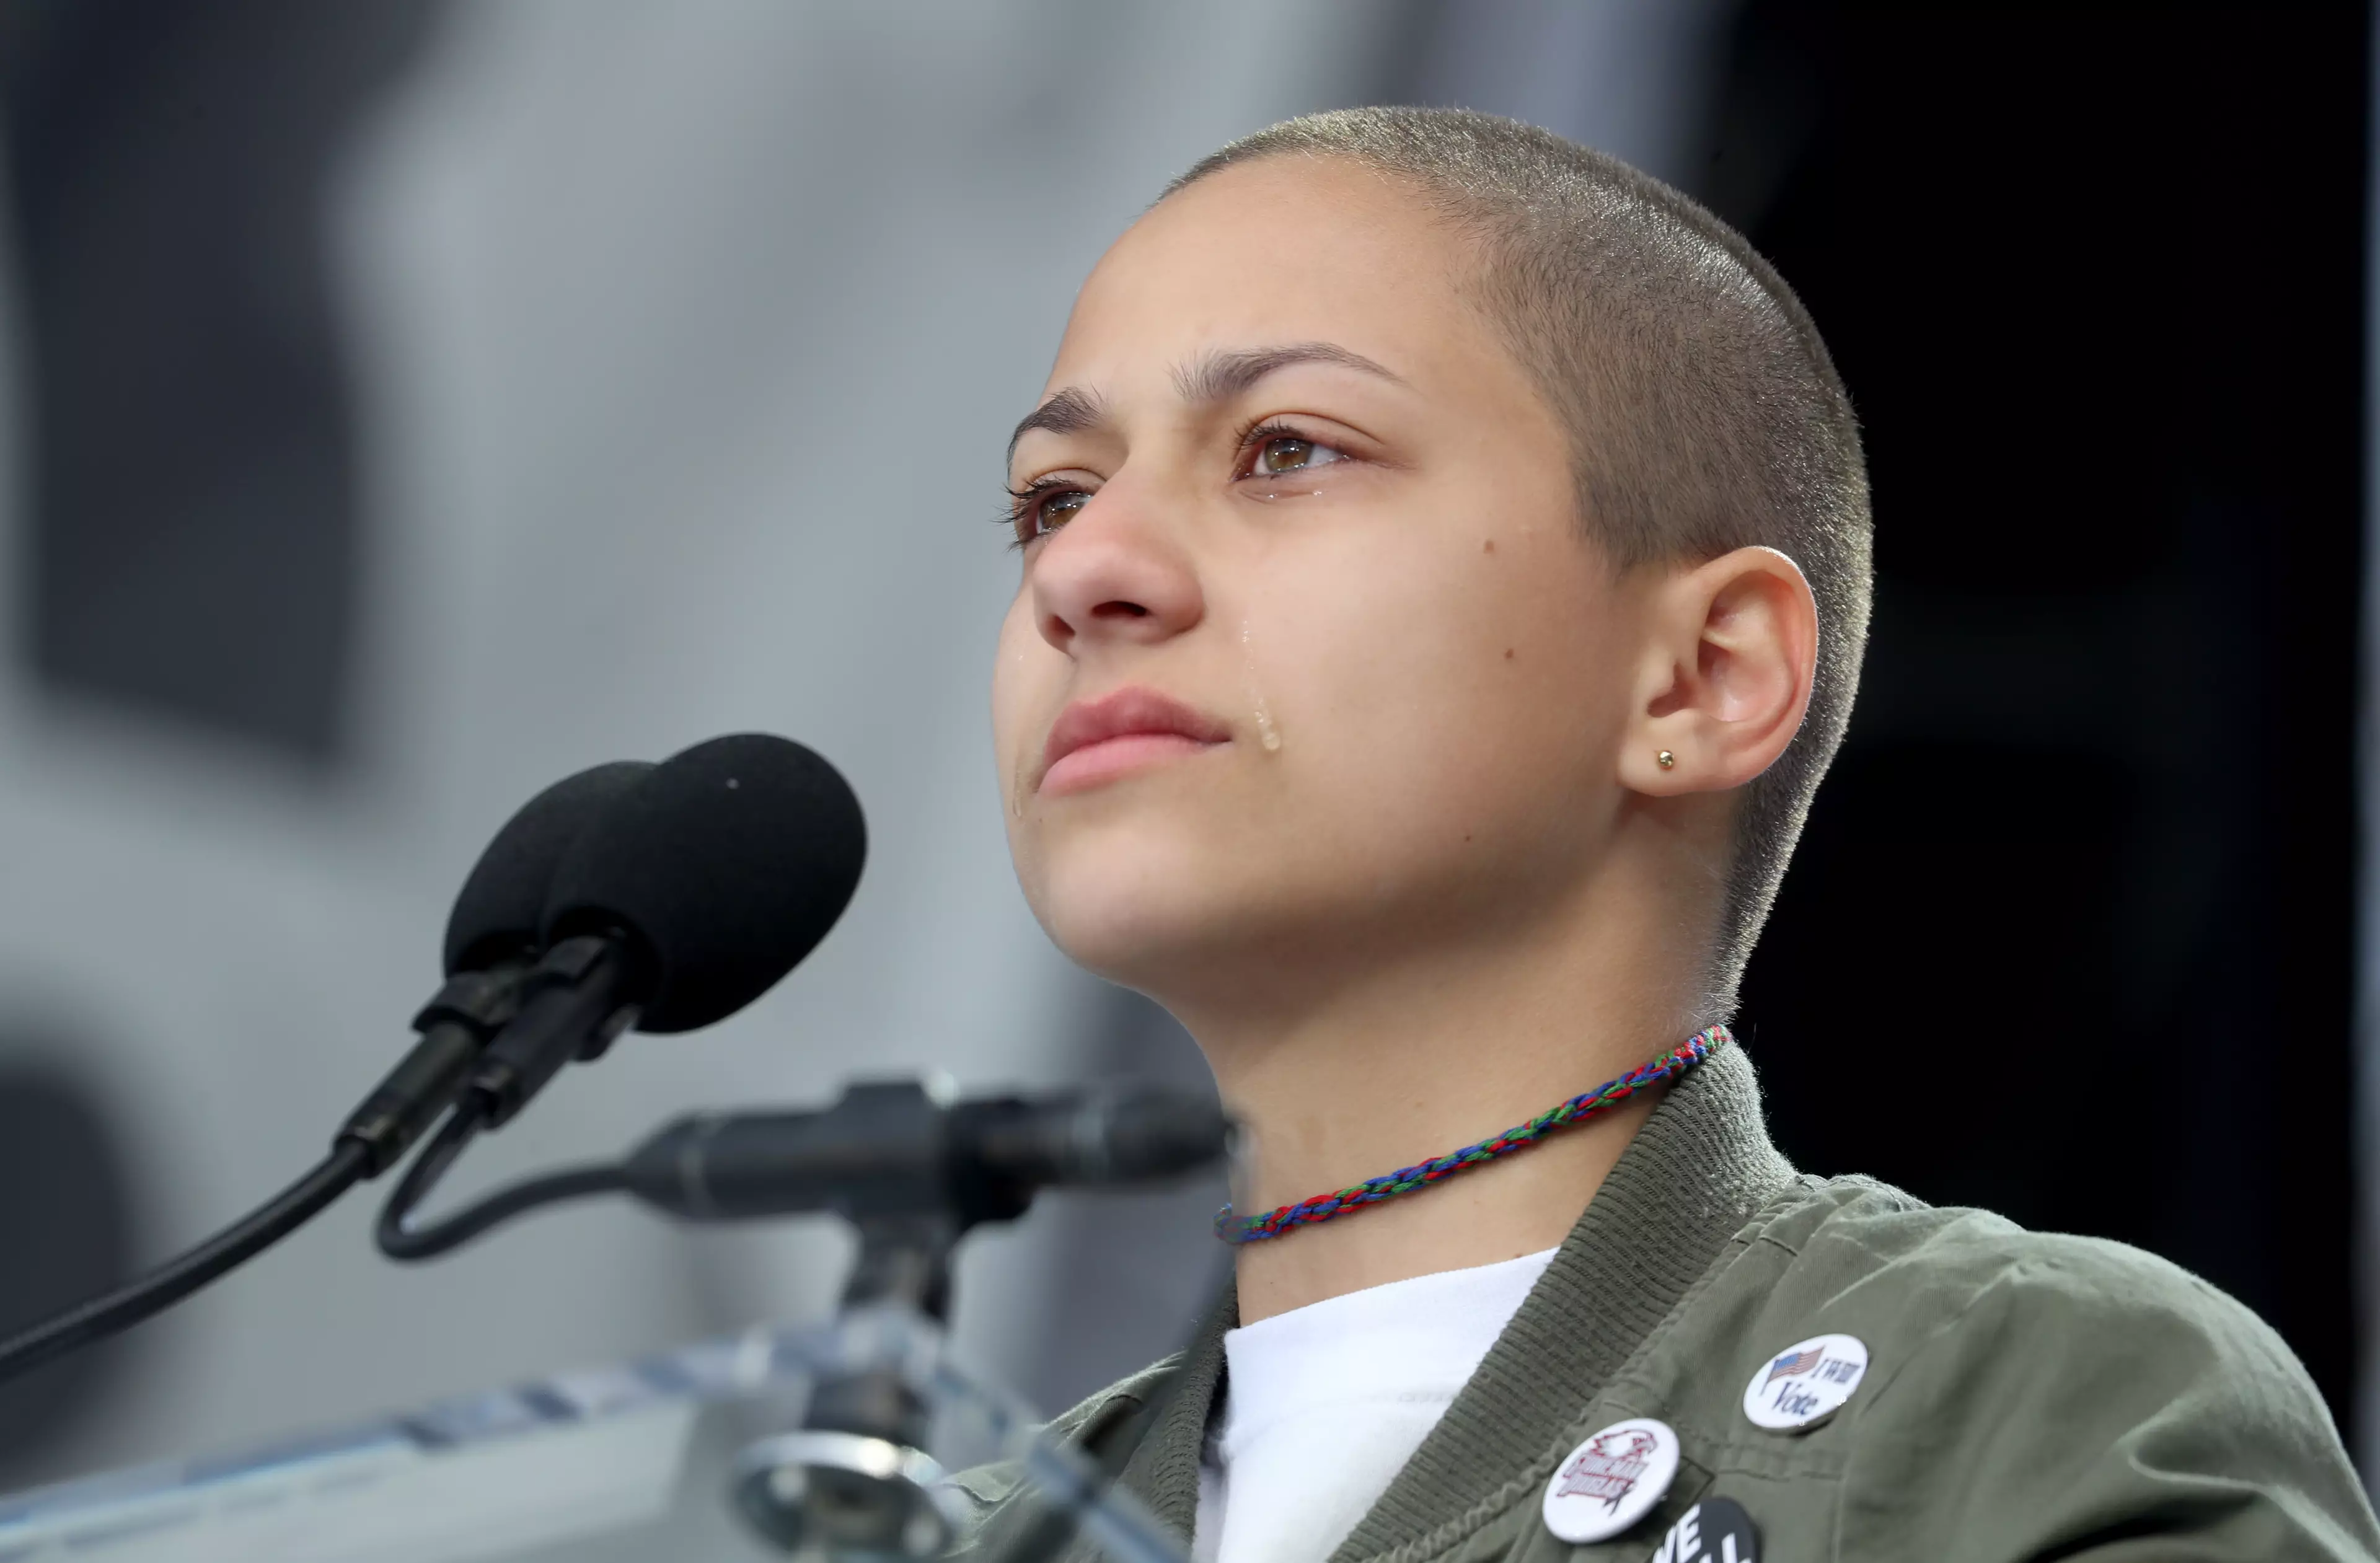 Parkland Survivor Emma Gonzales Pays Tearful Tribute At March For Our Lives 